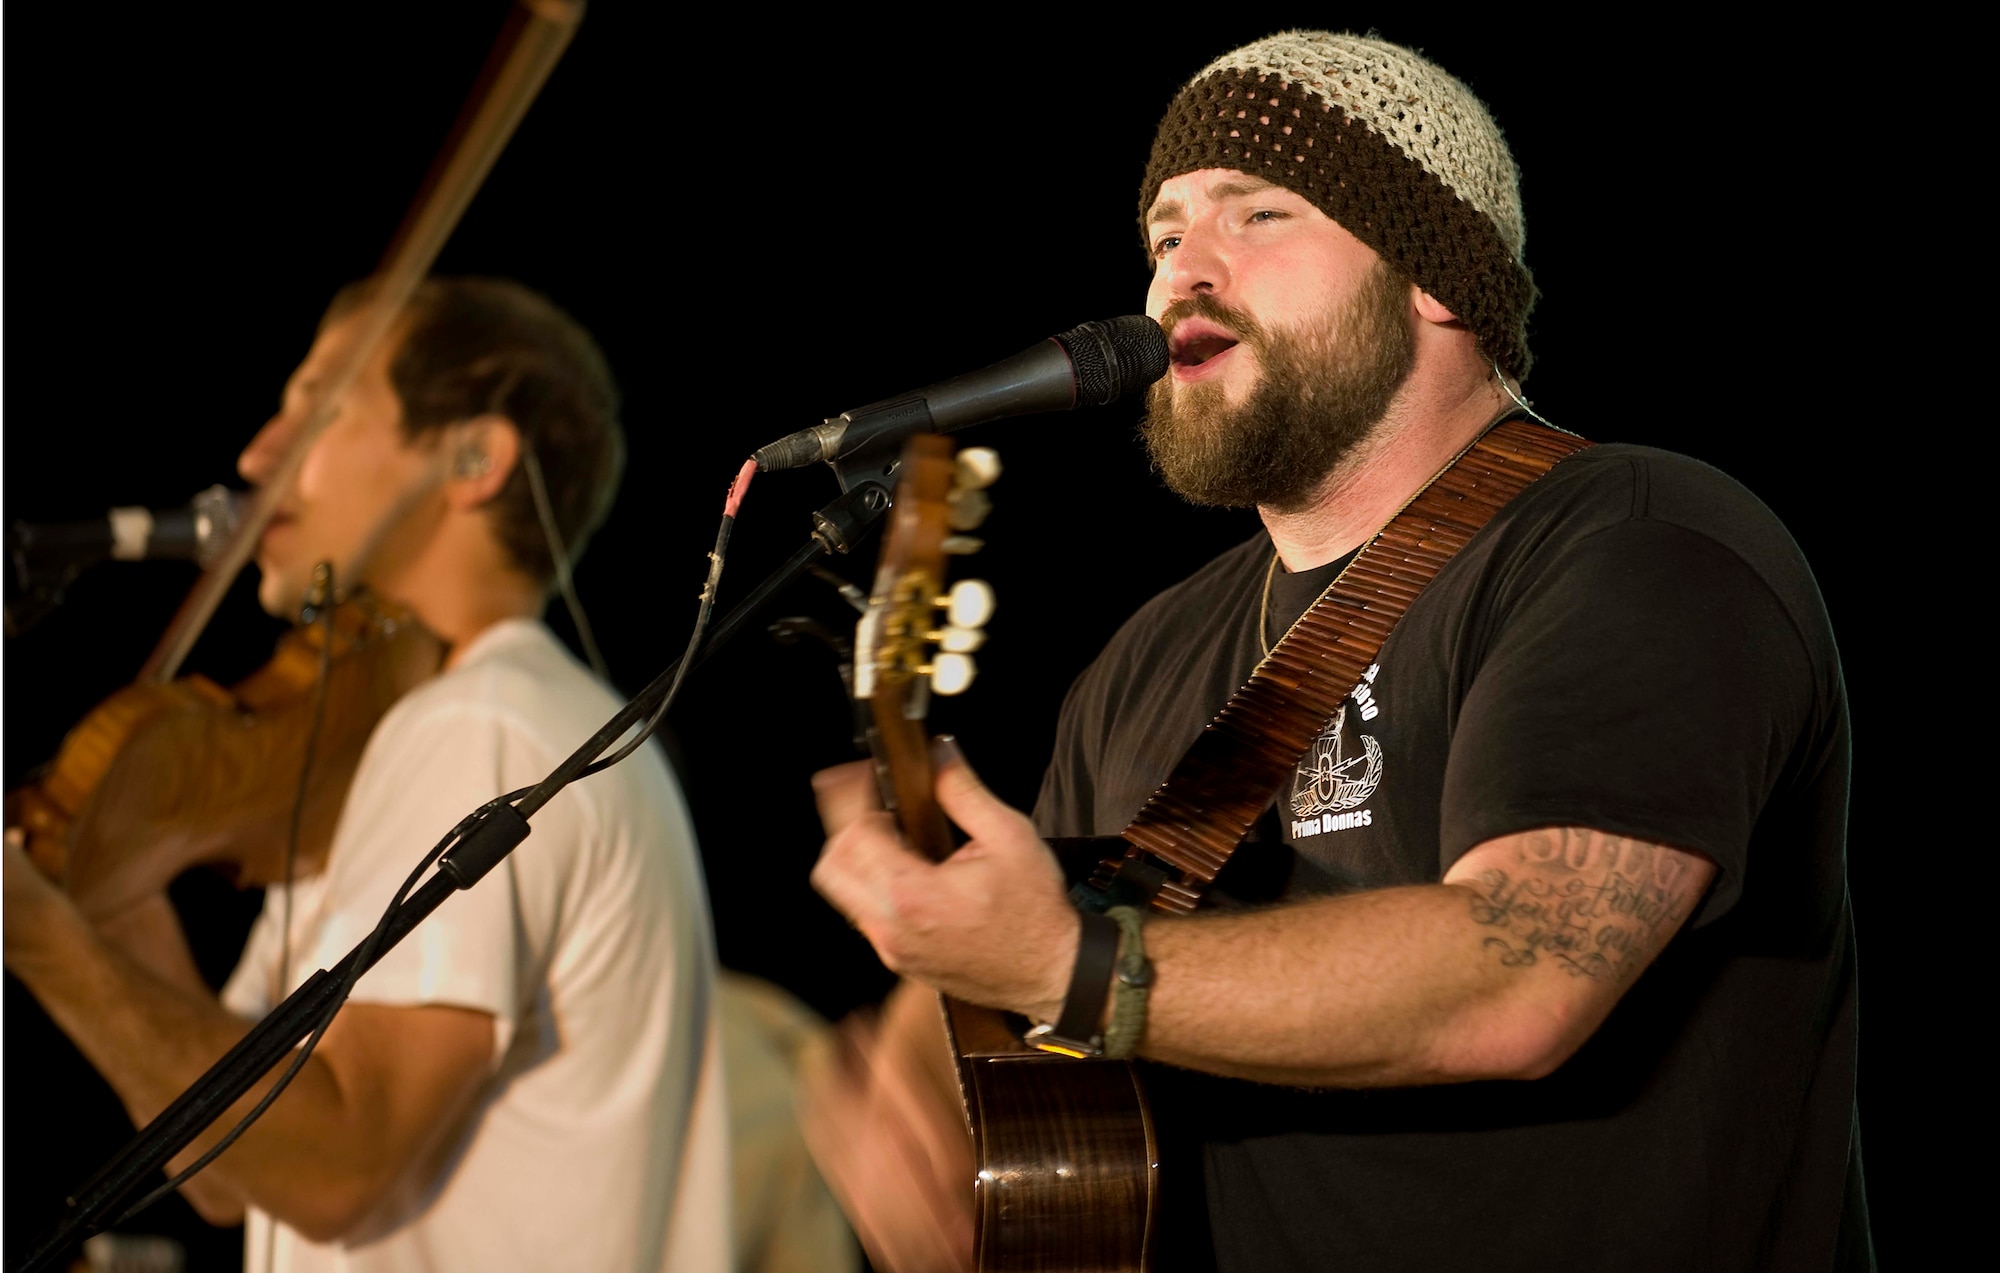 Zac Brown and his band perform for a crowd of deployed personnel in Holt Stadium at Joint Base Balad, Iraq, April 18, 2010. The Grammy nominated band is touring various bases throughout Southwest Asia to perform for the troops rather than attend this year's Academy of Country Music Awards for which they were nominated. (U.S. Air Force photo by Master Sgt. Linda C. Miller/Released)